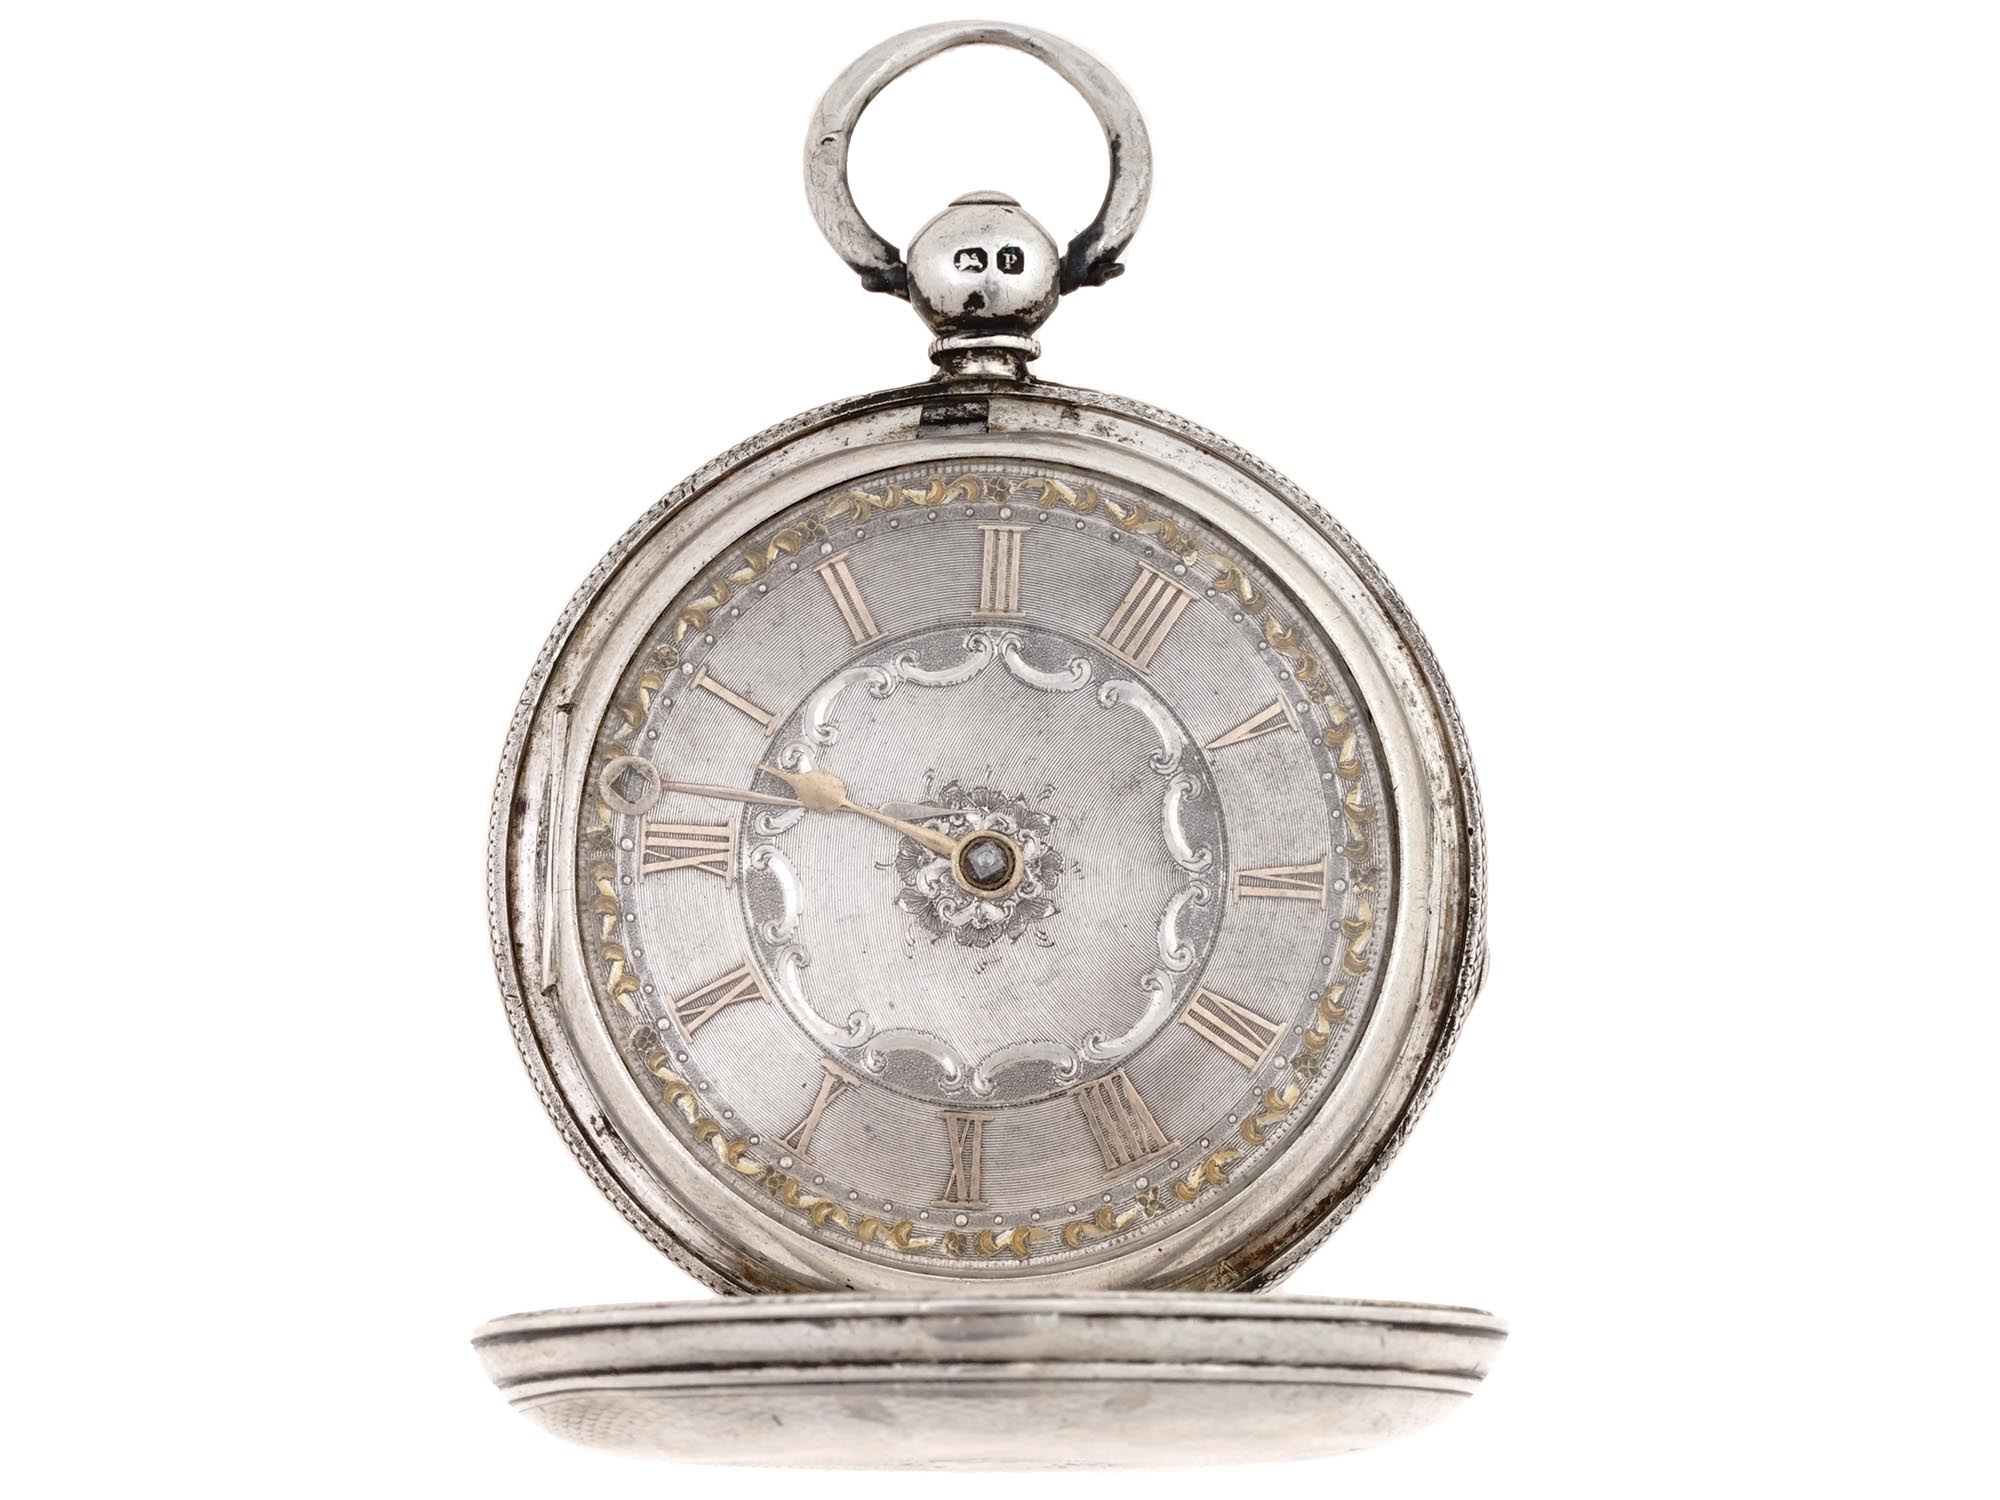 ANTIQUE ENGLISH SILVER POCKET WATCH PIC-0